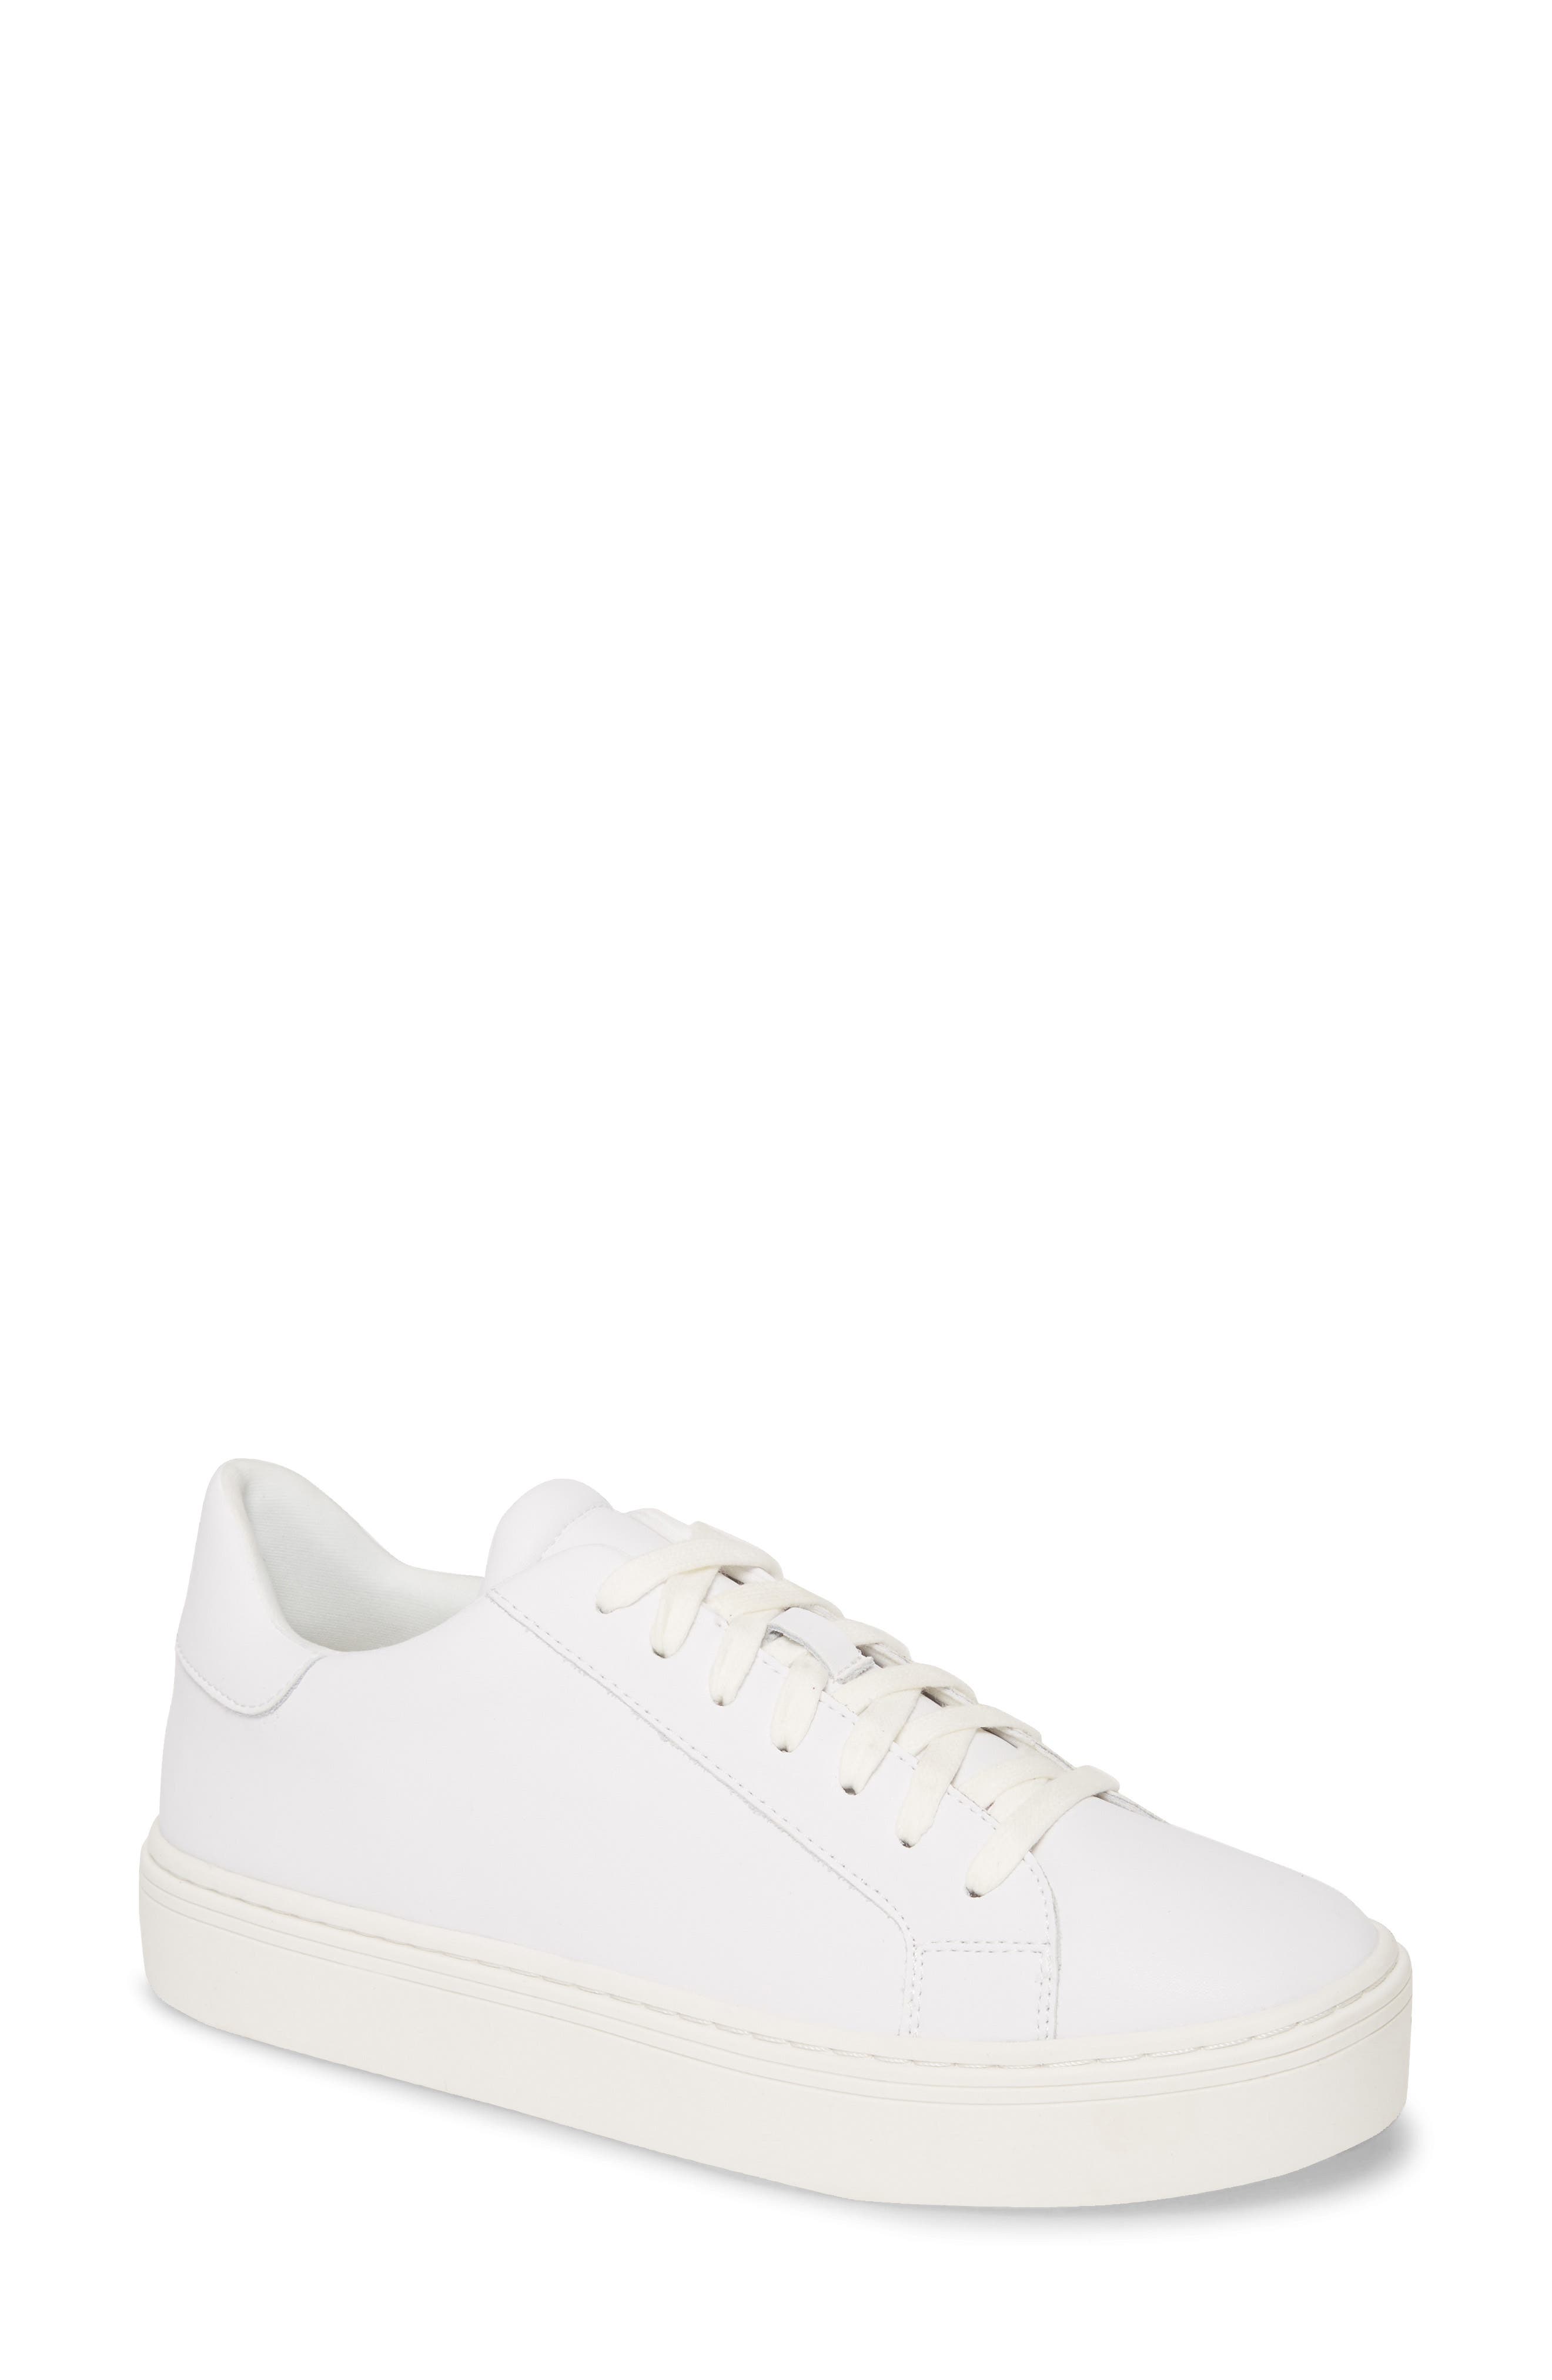 white platform sneakers leather